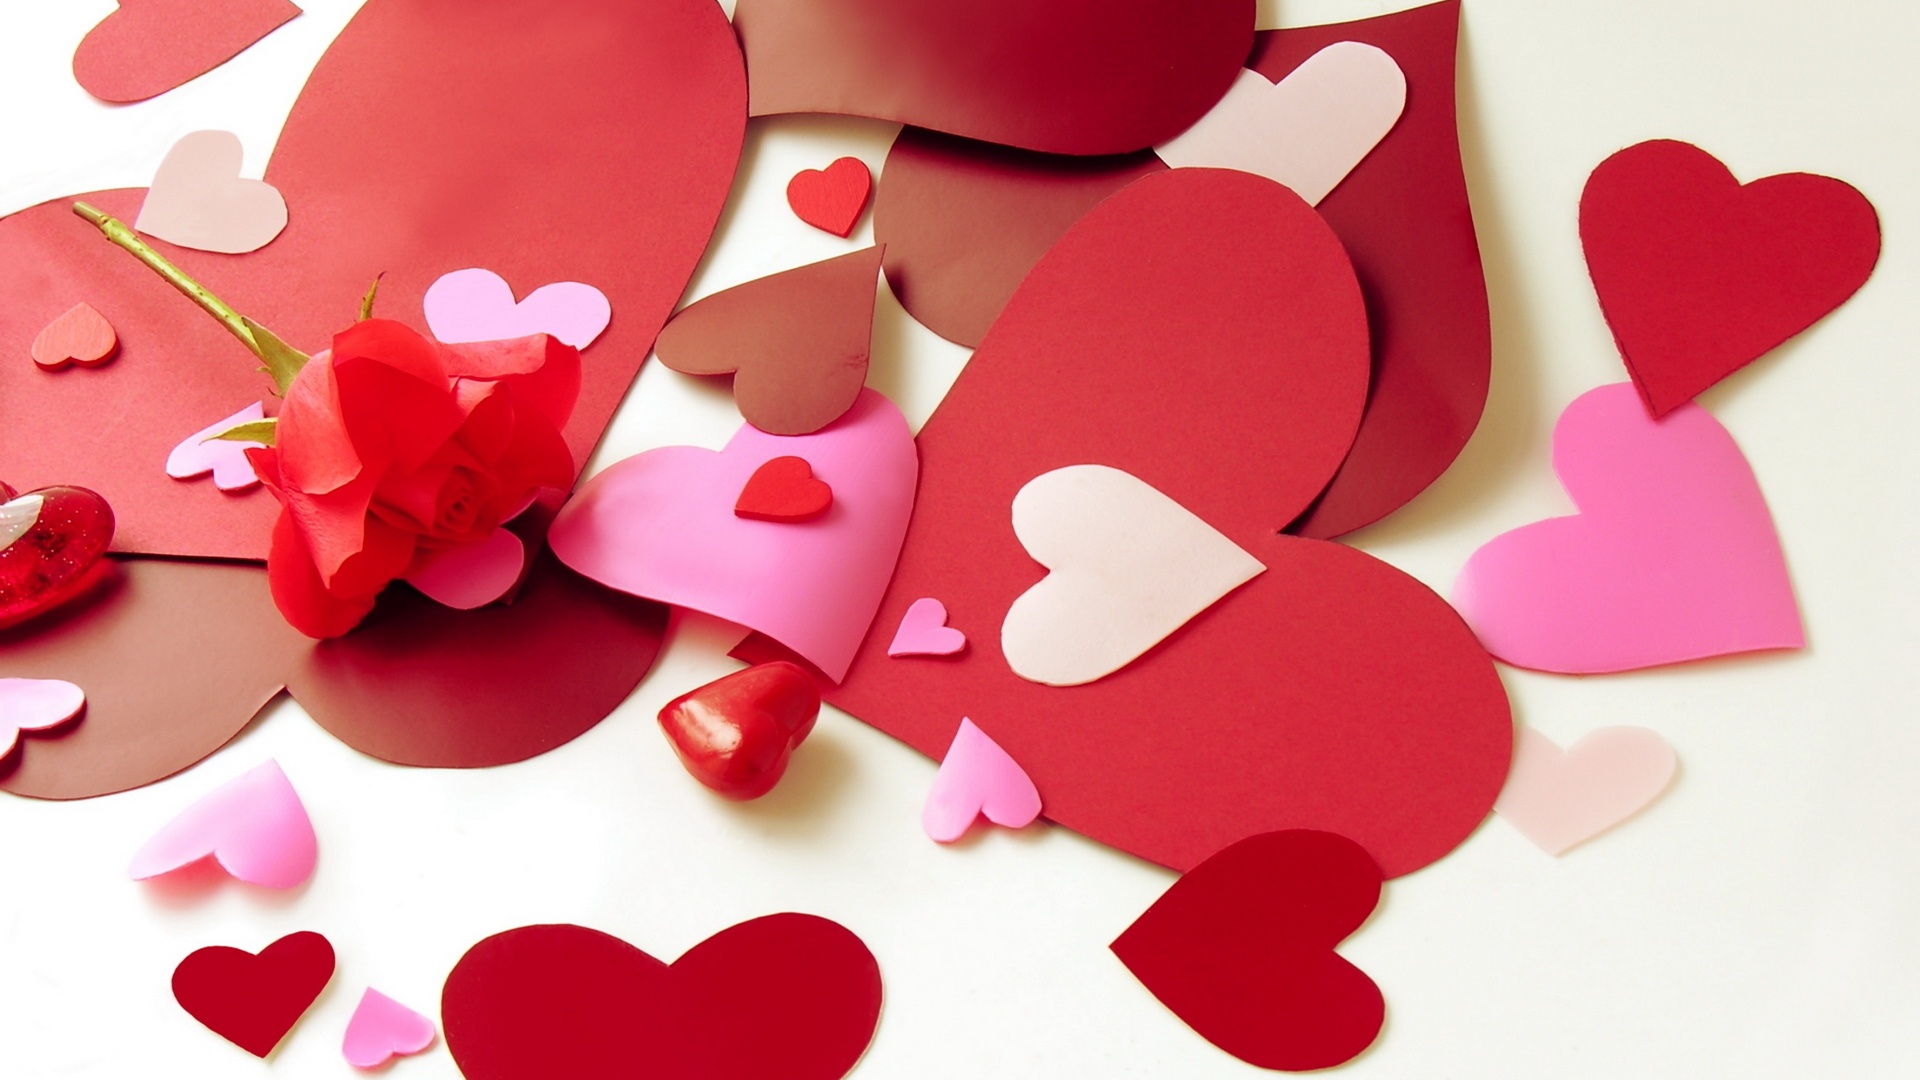 Valentine's Day HD Wallpapers - Wallpaper, High Definition, High Quality,  Widescreen